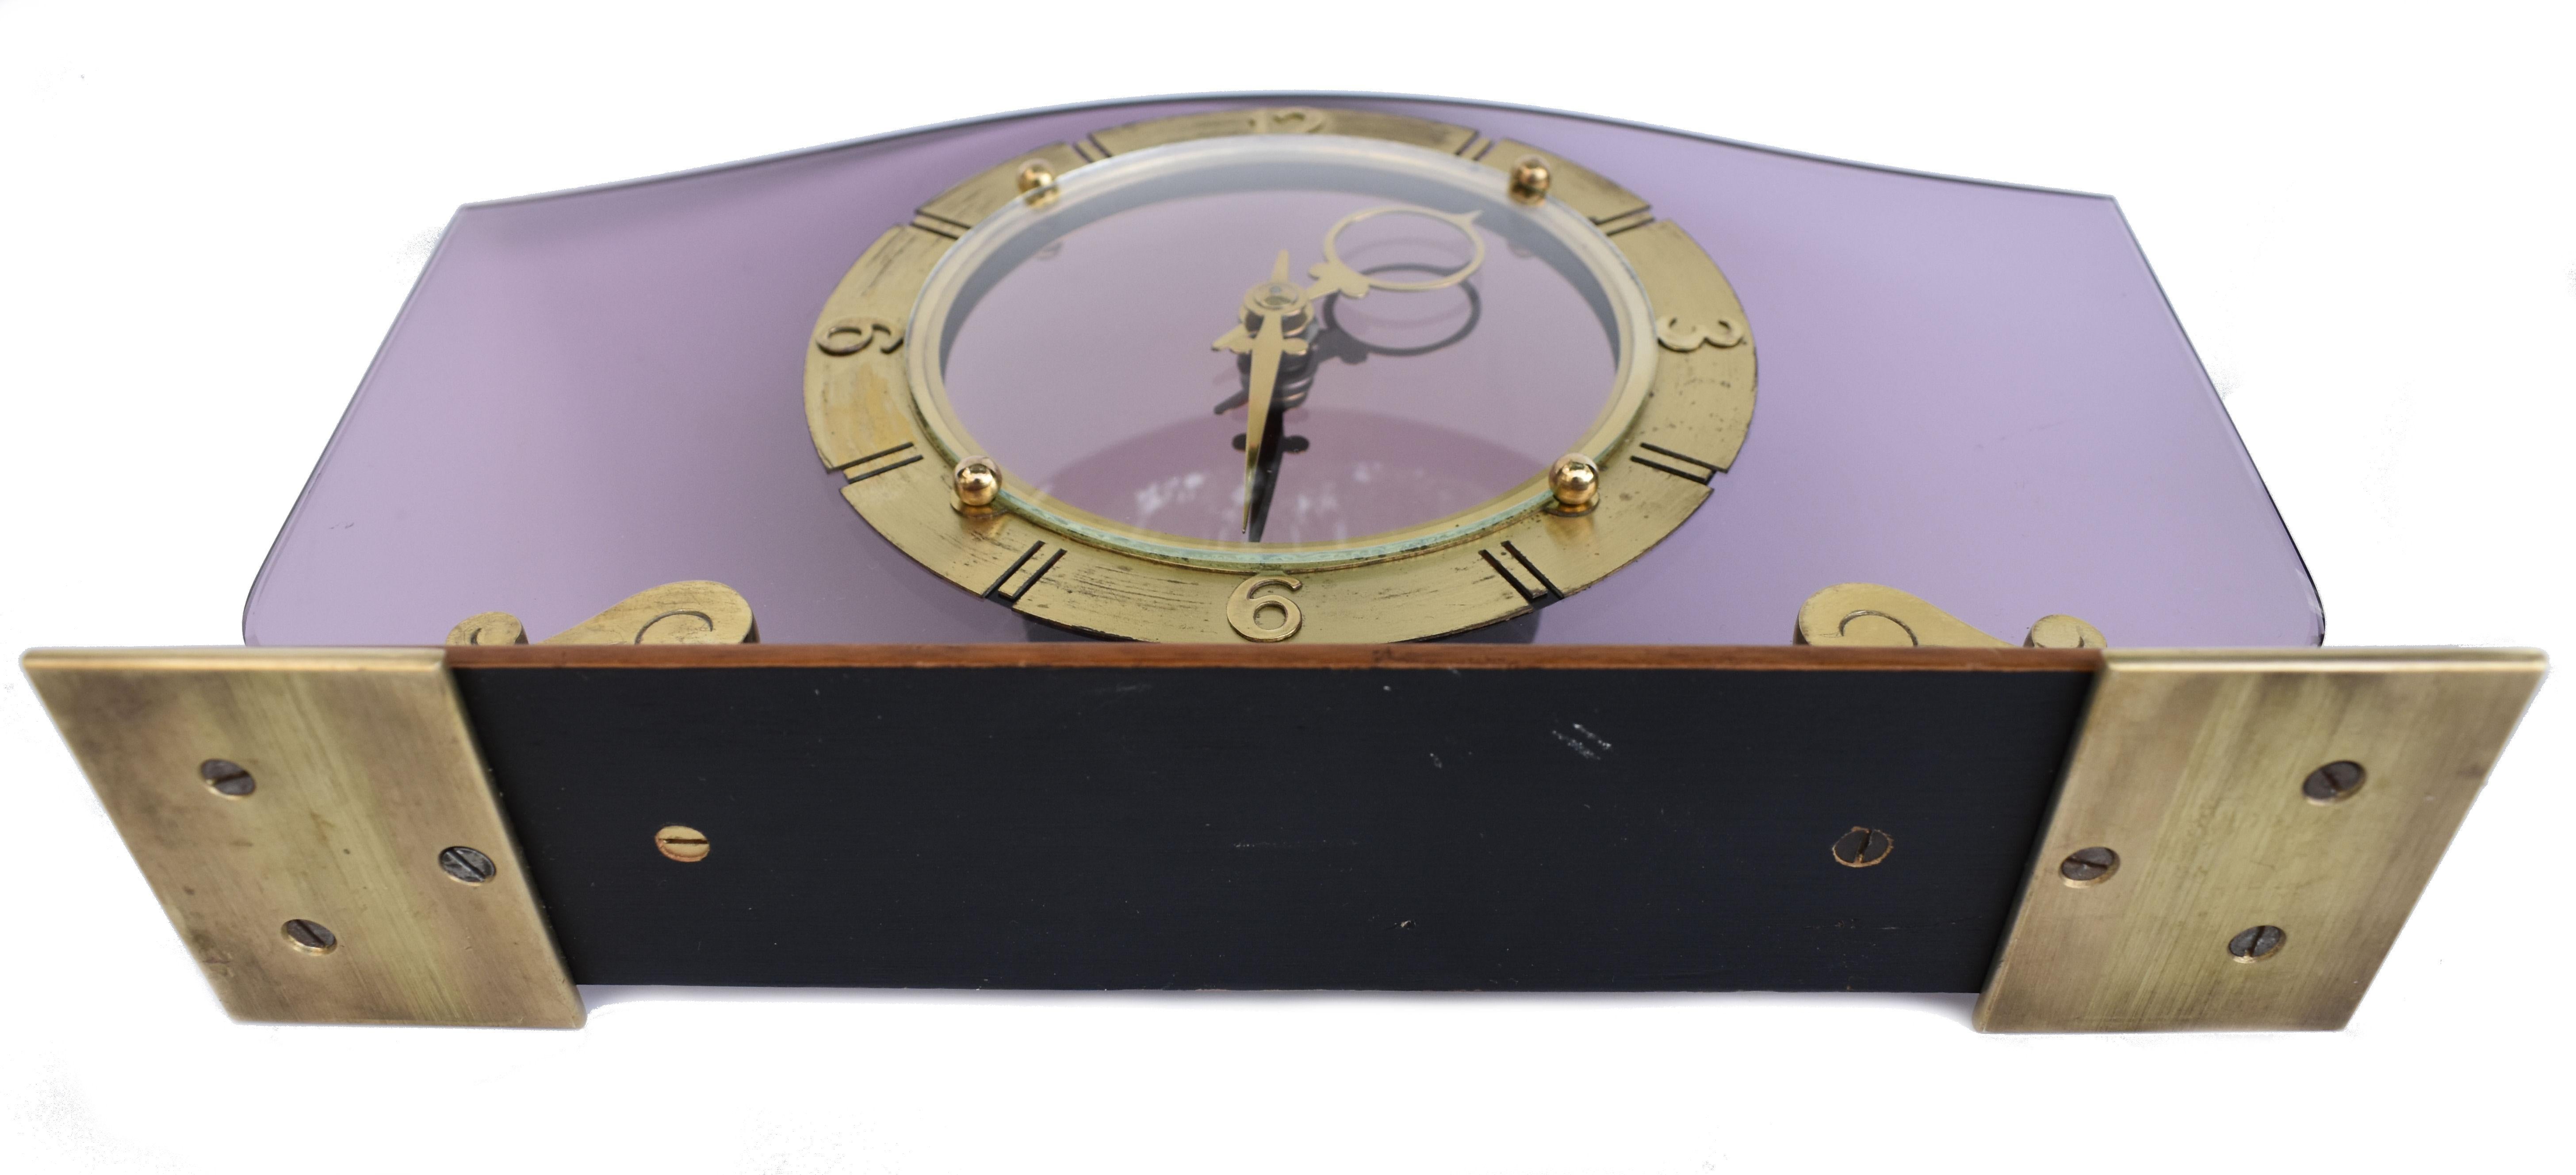 Art Deco Glass & Mirror 8 Day Mantle Clock, 1930 For Sale 2